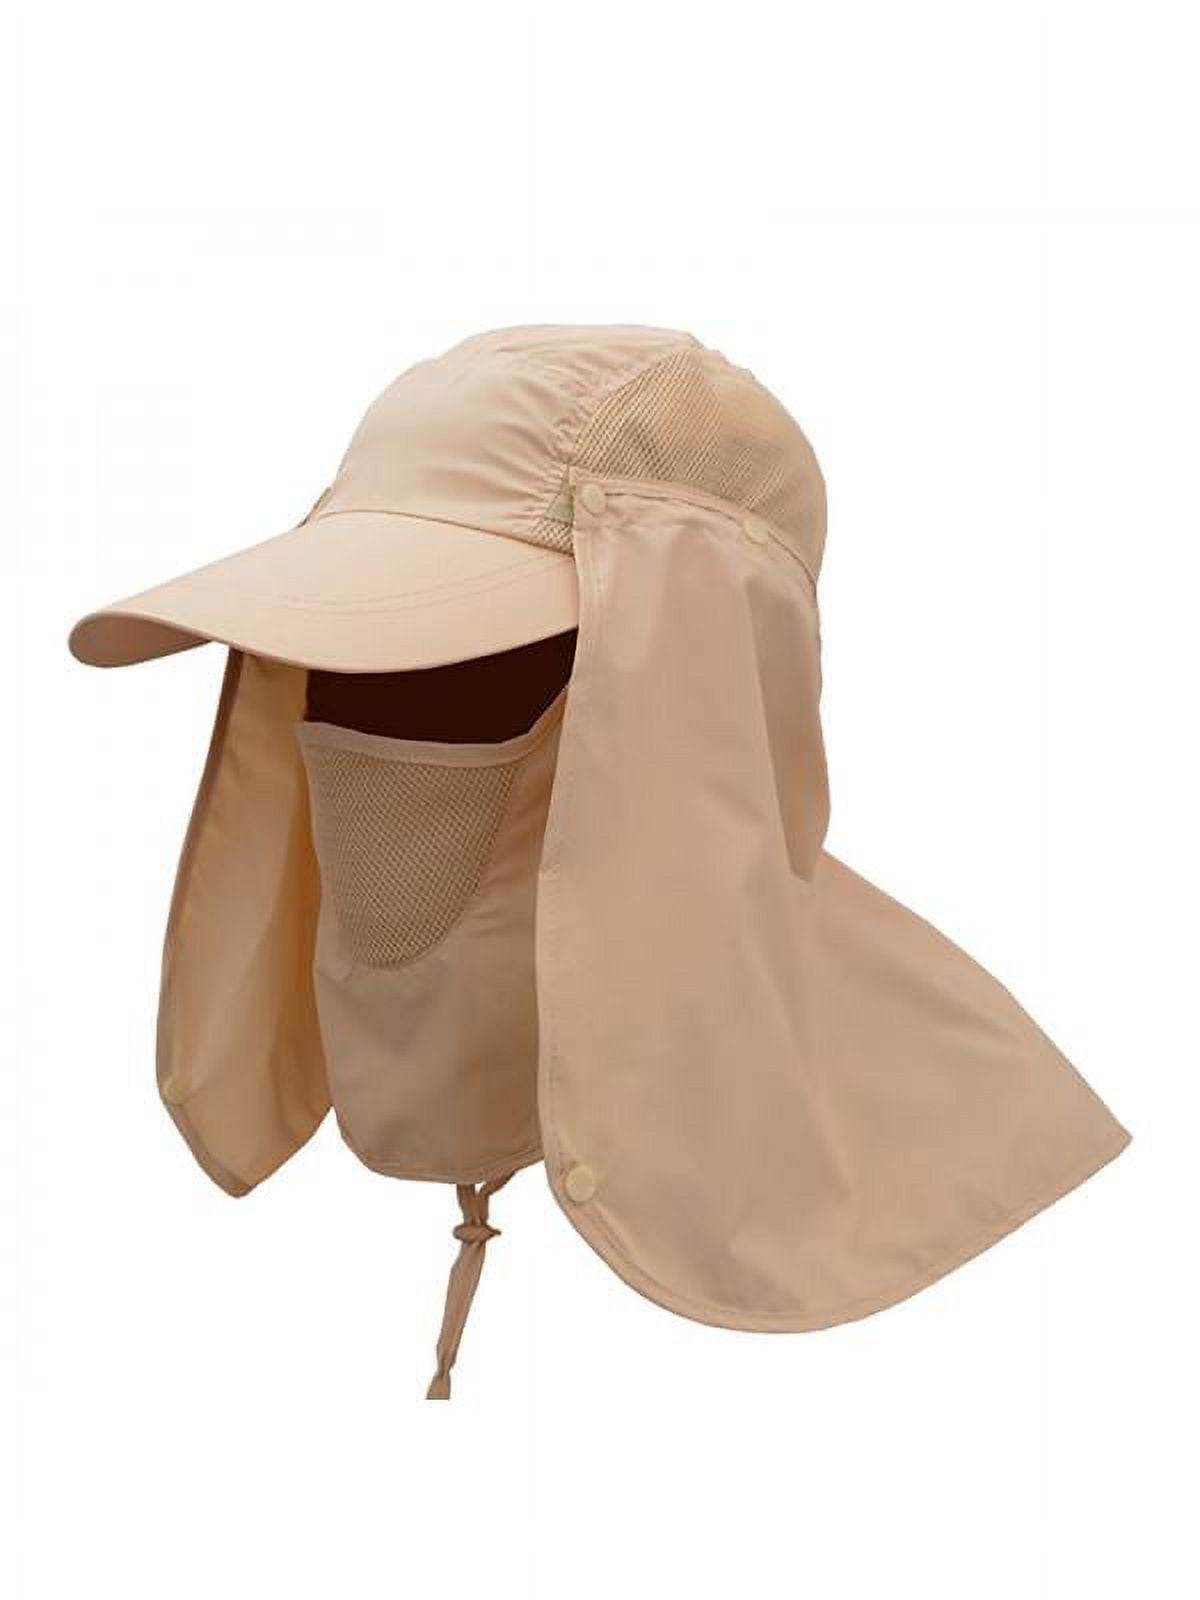 Foldable Sun Cap, Fishing Hats, Sunshade UV Protection Caps with Neck Flap  Face Shield 